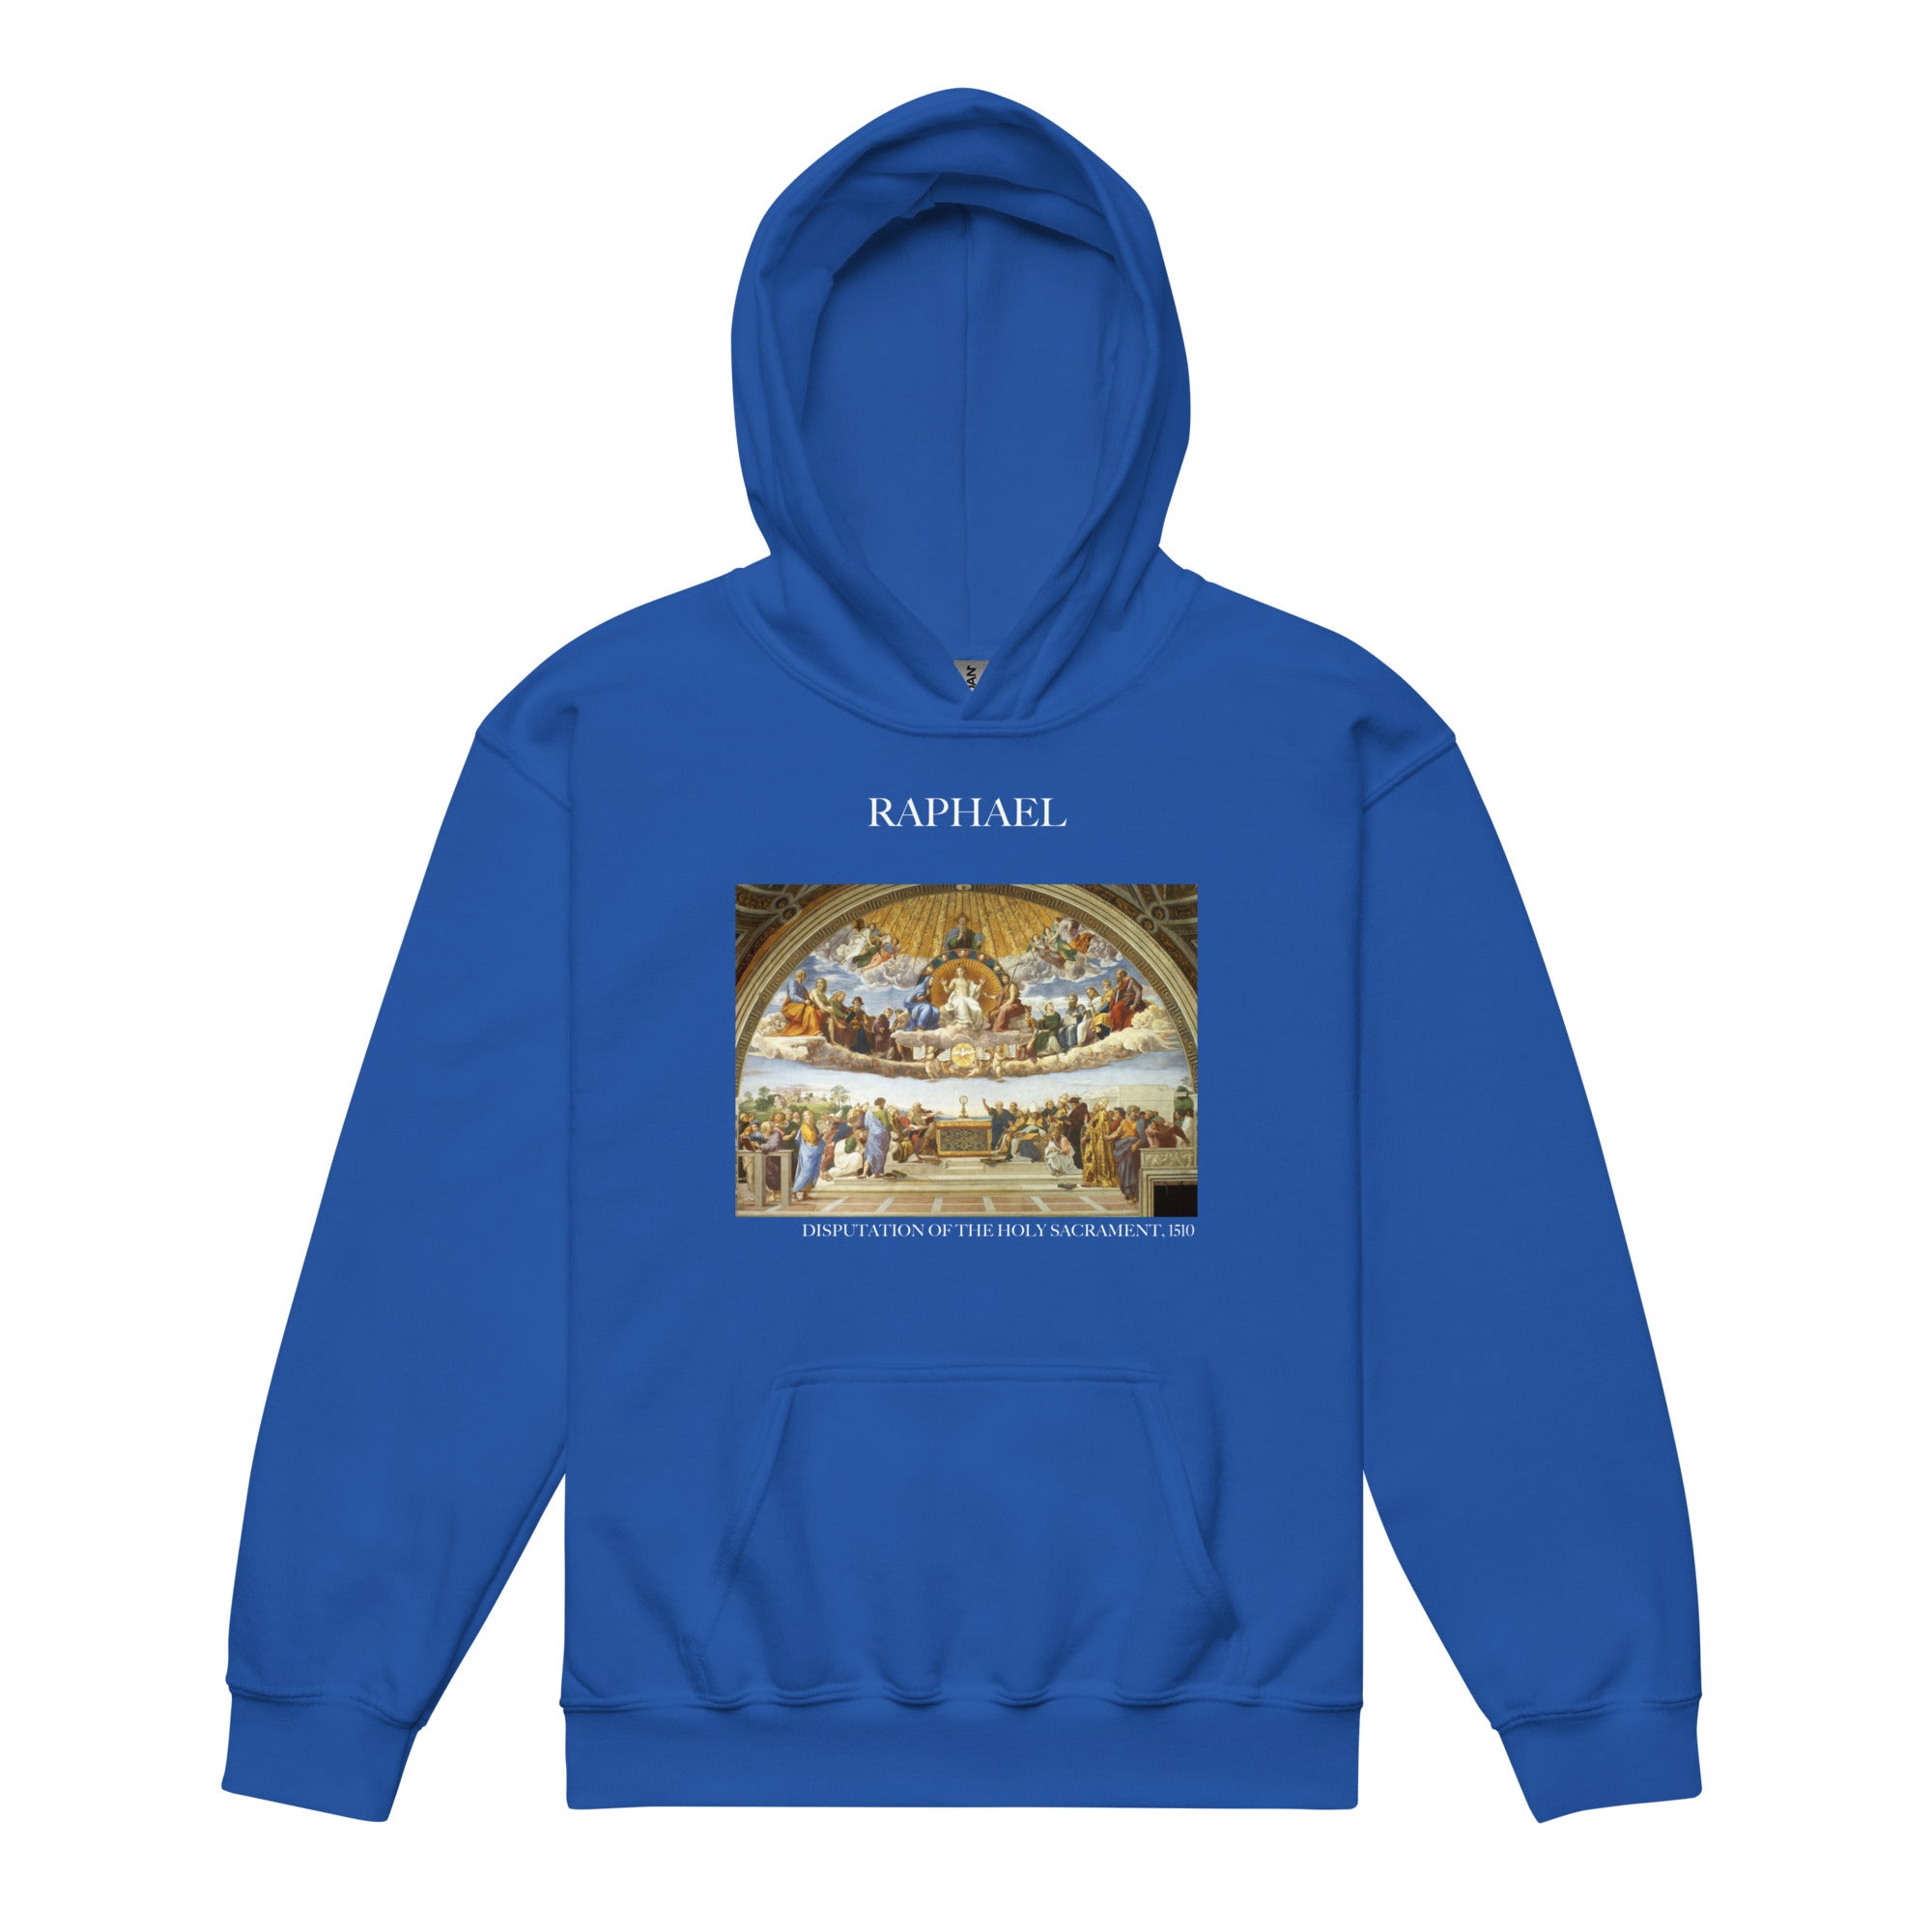 Raphael 'Disputation of the Holy Sacrament' Famous Painting Hoodie | Premium Youth Art Hoodie